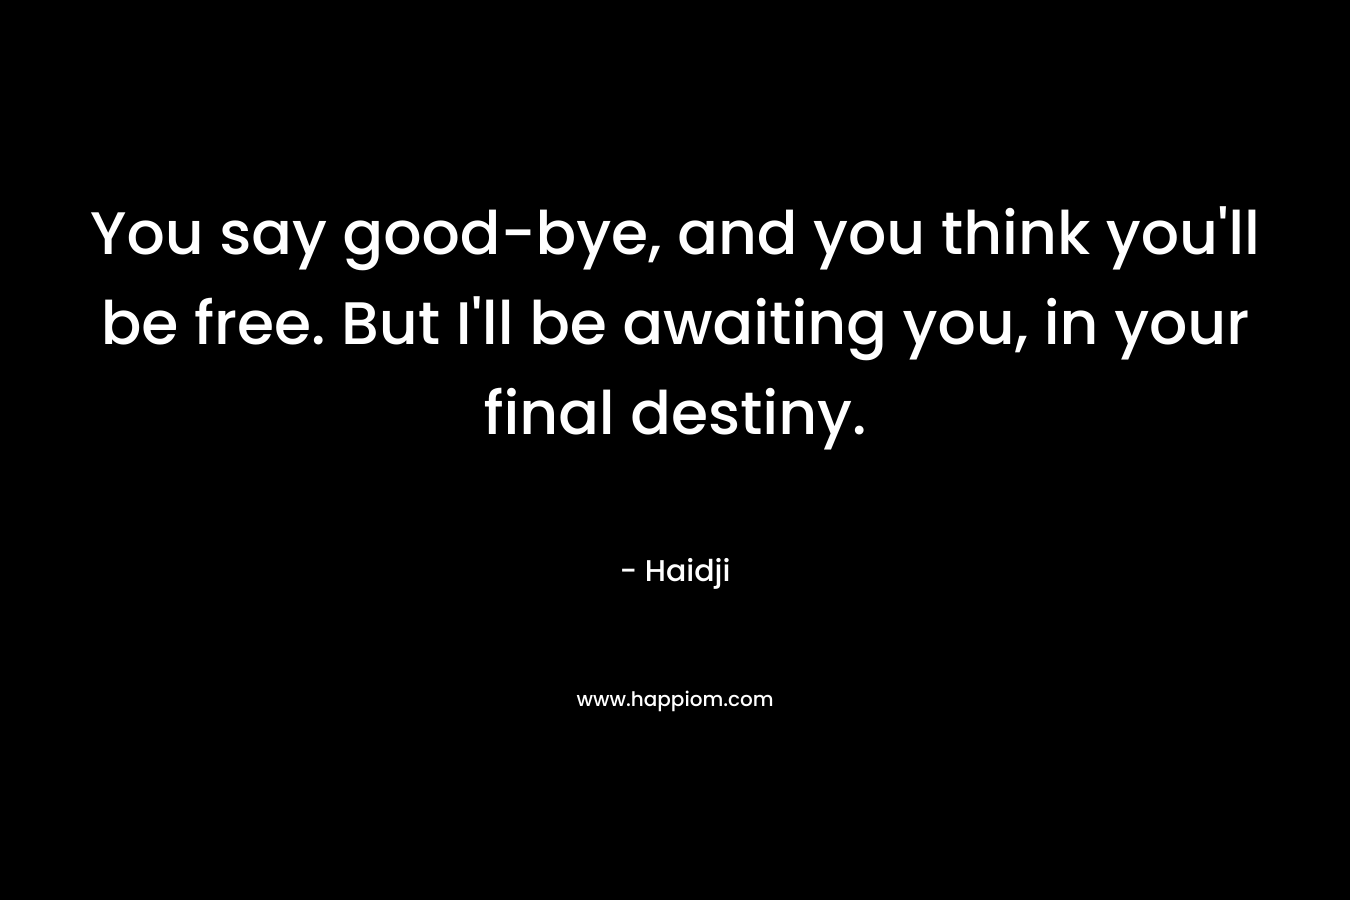 You say good-bye, and you think you'll be free. But I'll be awaiting you, in your final destiny.